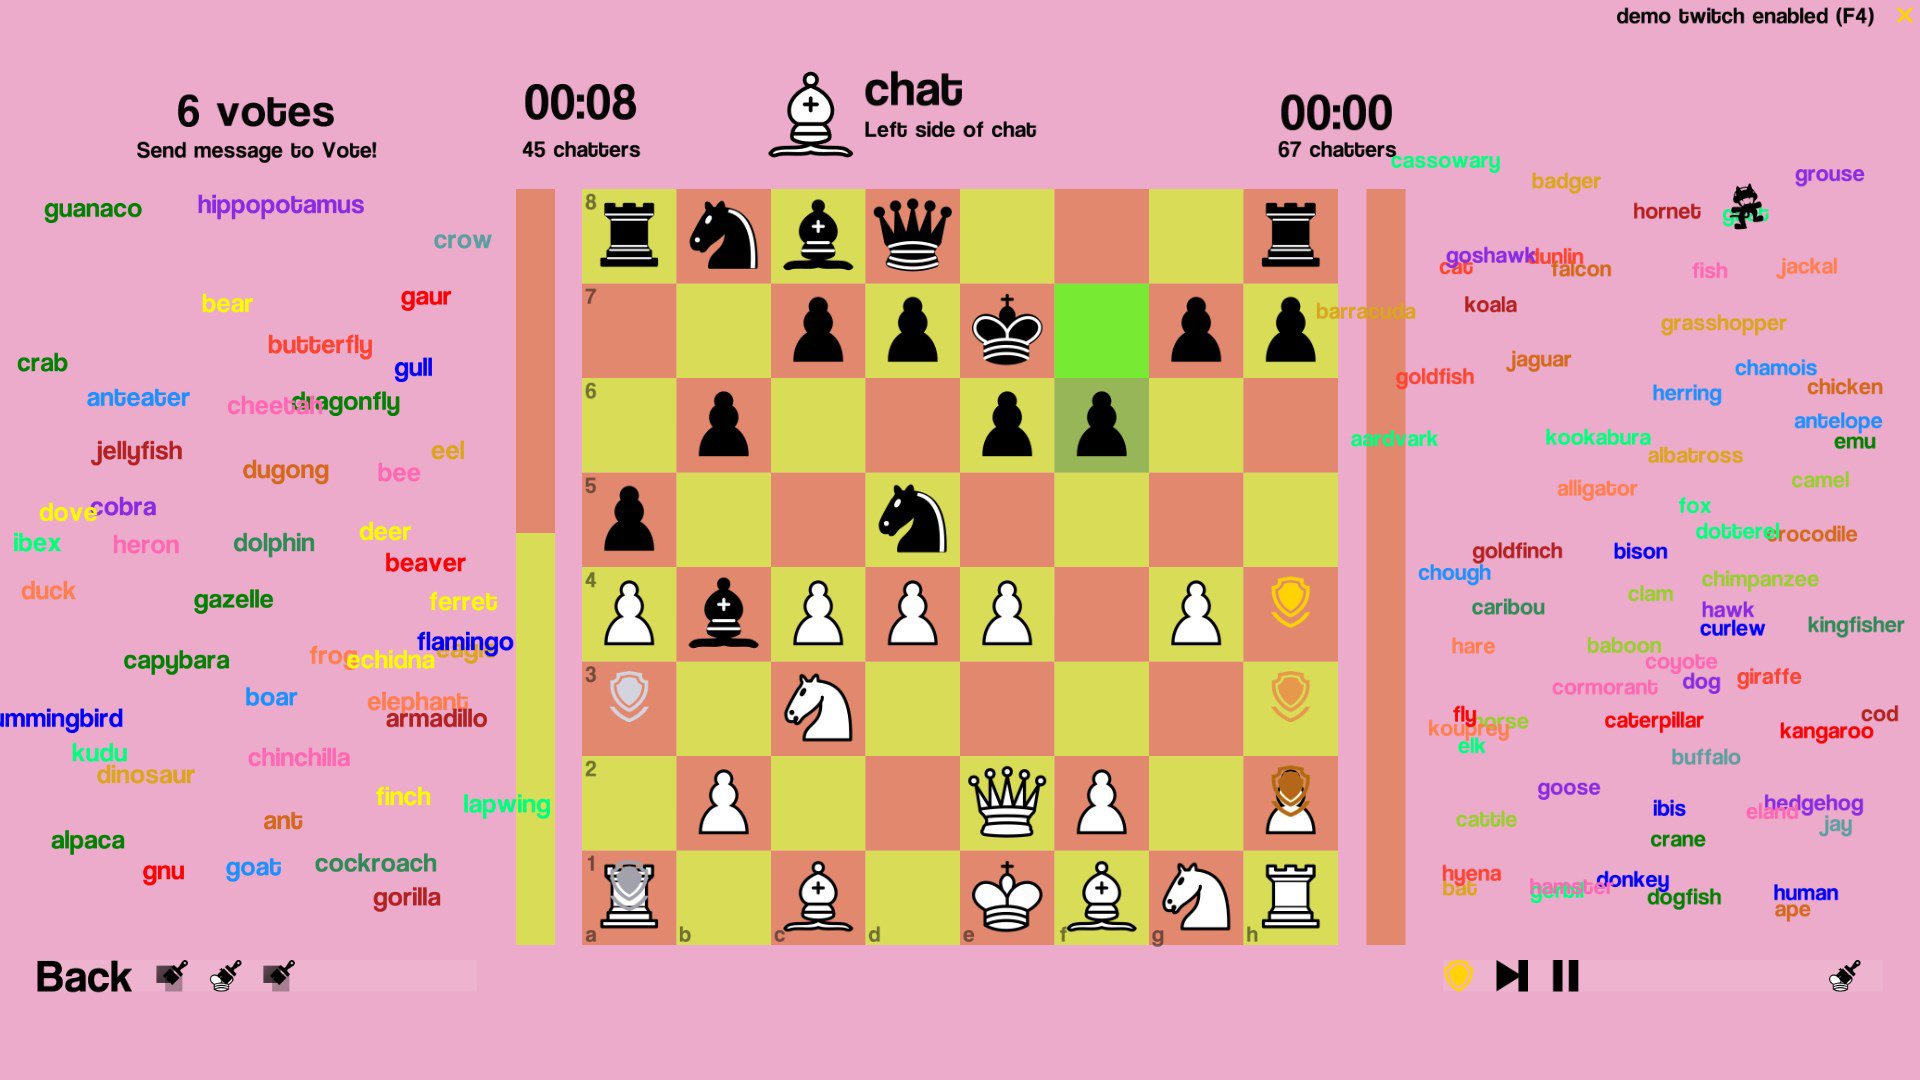 Chess vs Chat Free Download